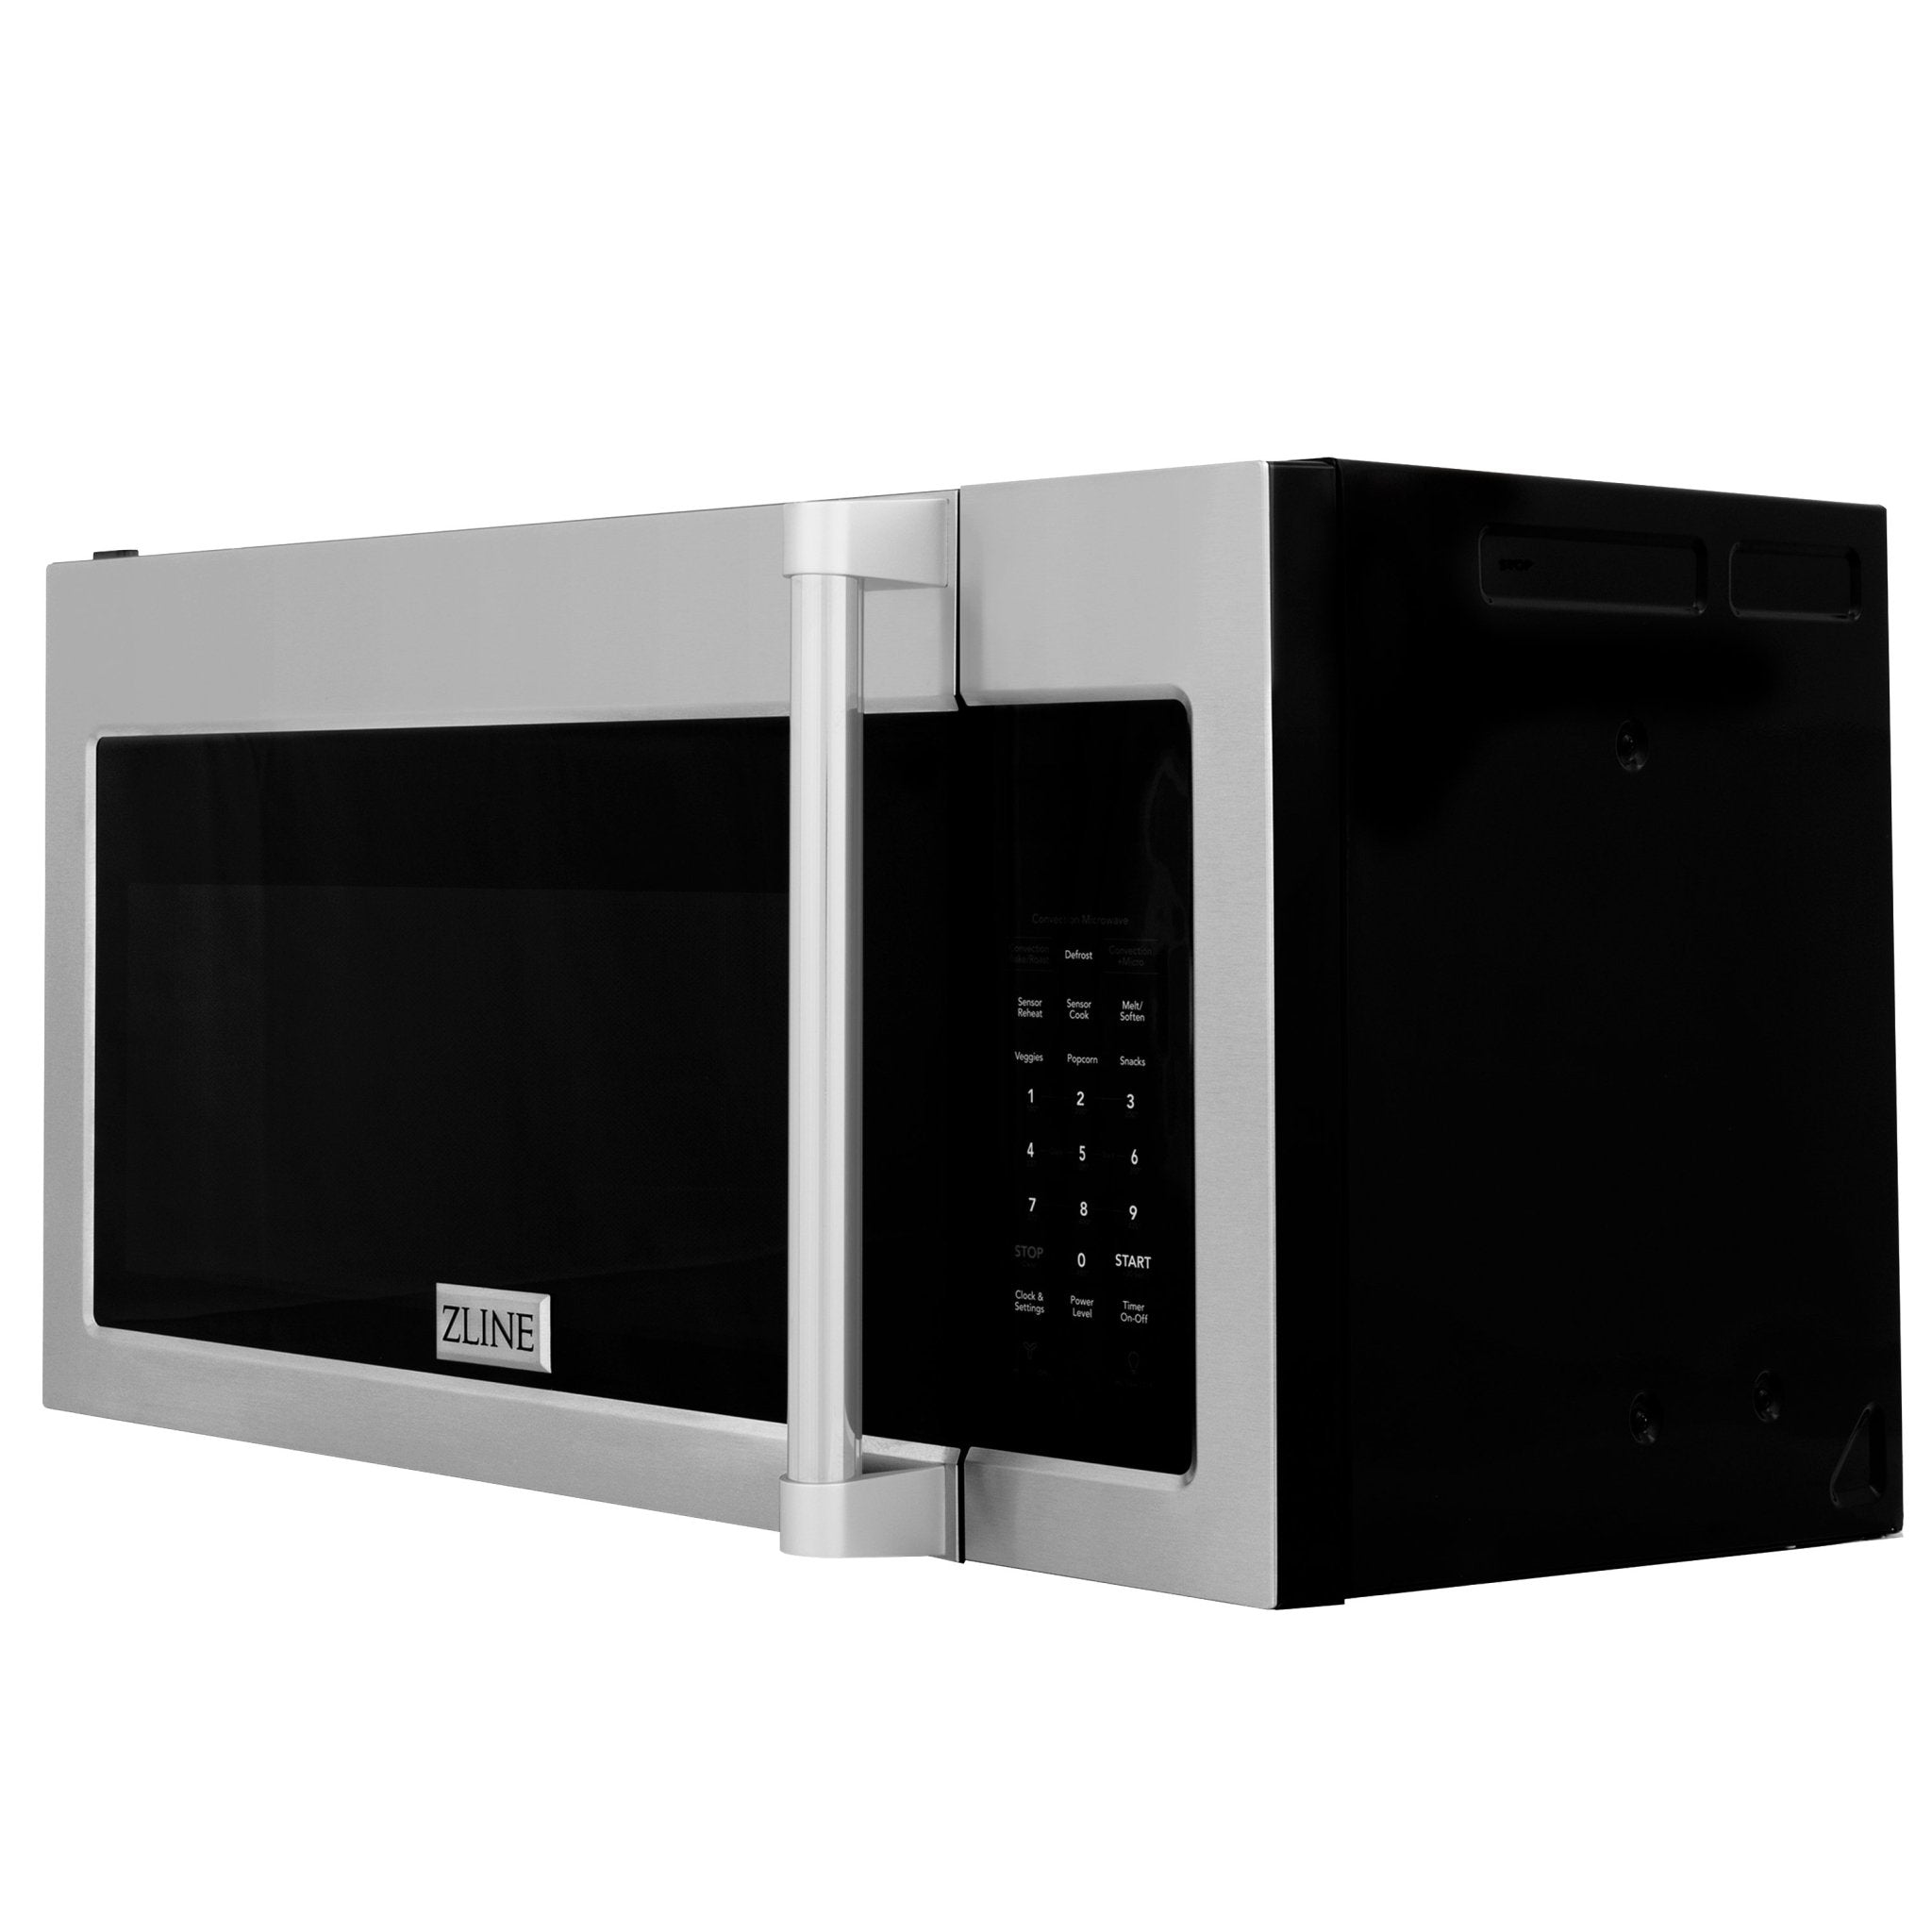 ZLINE 30" 1.5 cu. ft. Over the Range Microwave in Stainless Steel with Traditional Handle and Set of 2 Charcoal Filters (MWO-OTRCFH-30)